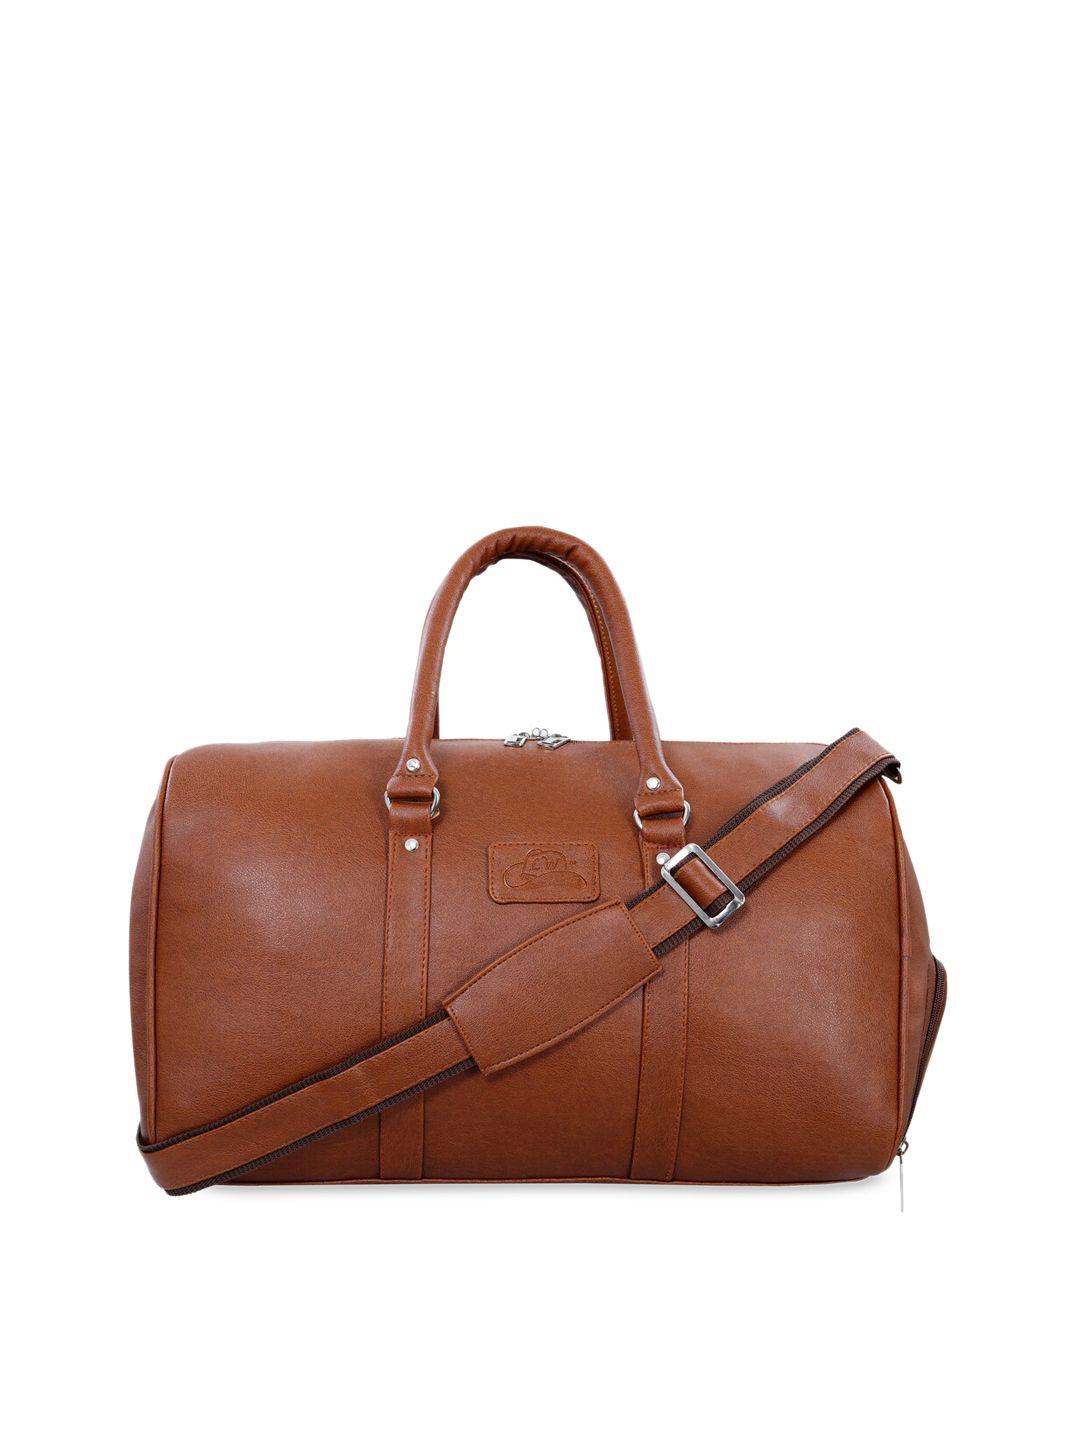 leather world unisex tan brown solid duffel bag